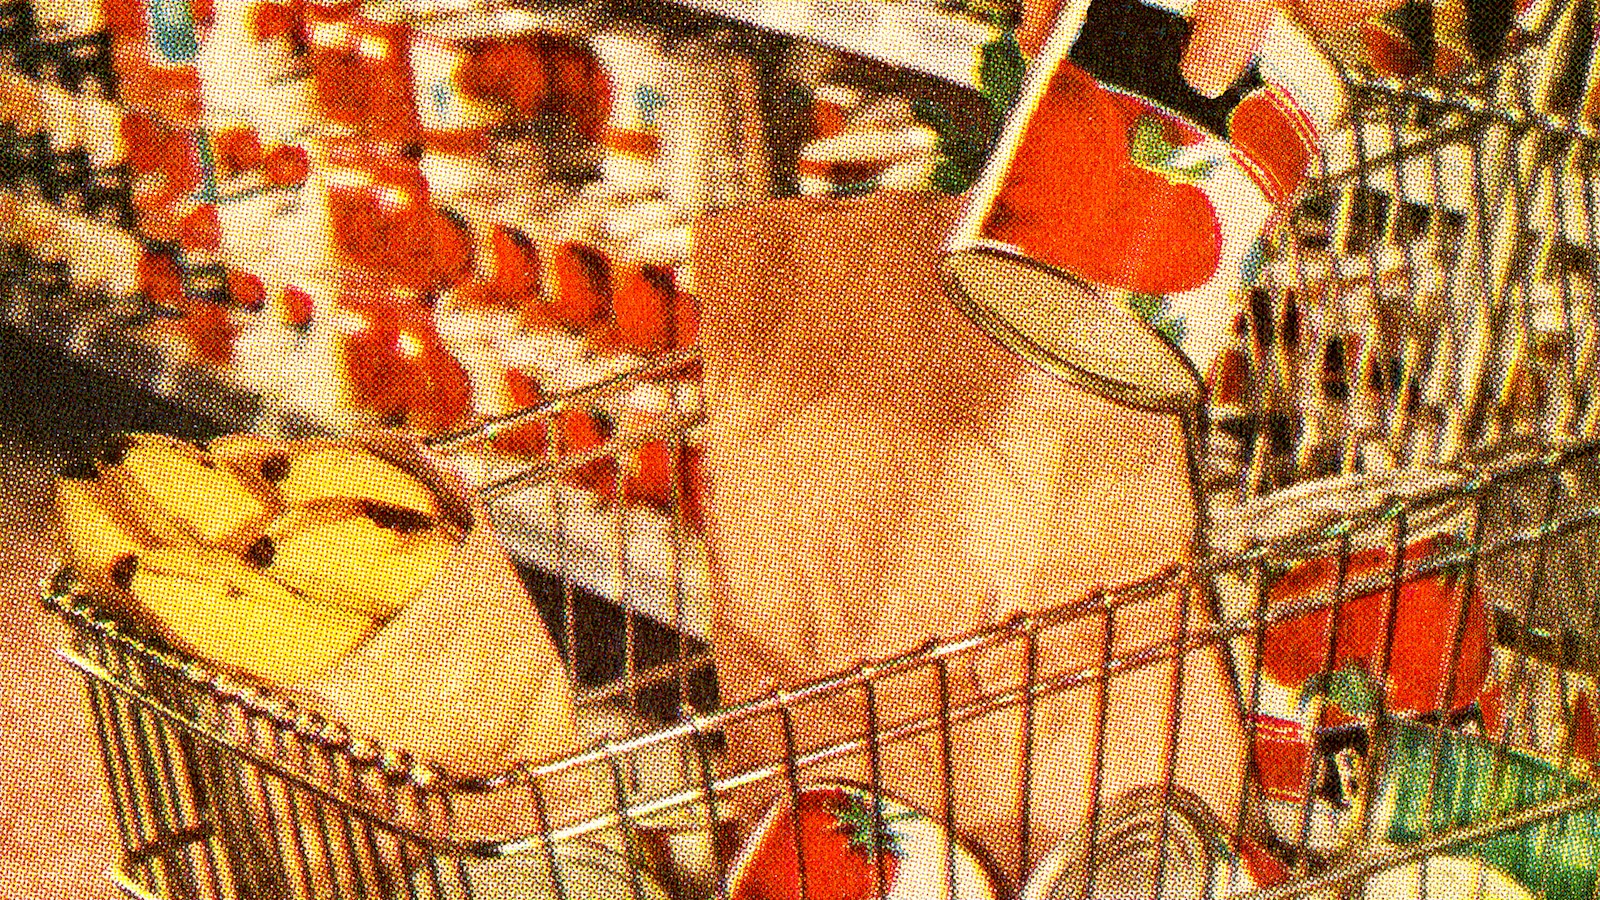 Shopping Cart Filled with Groceries